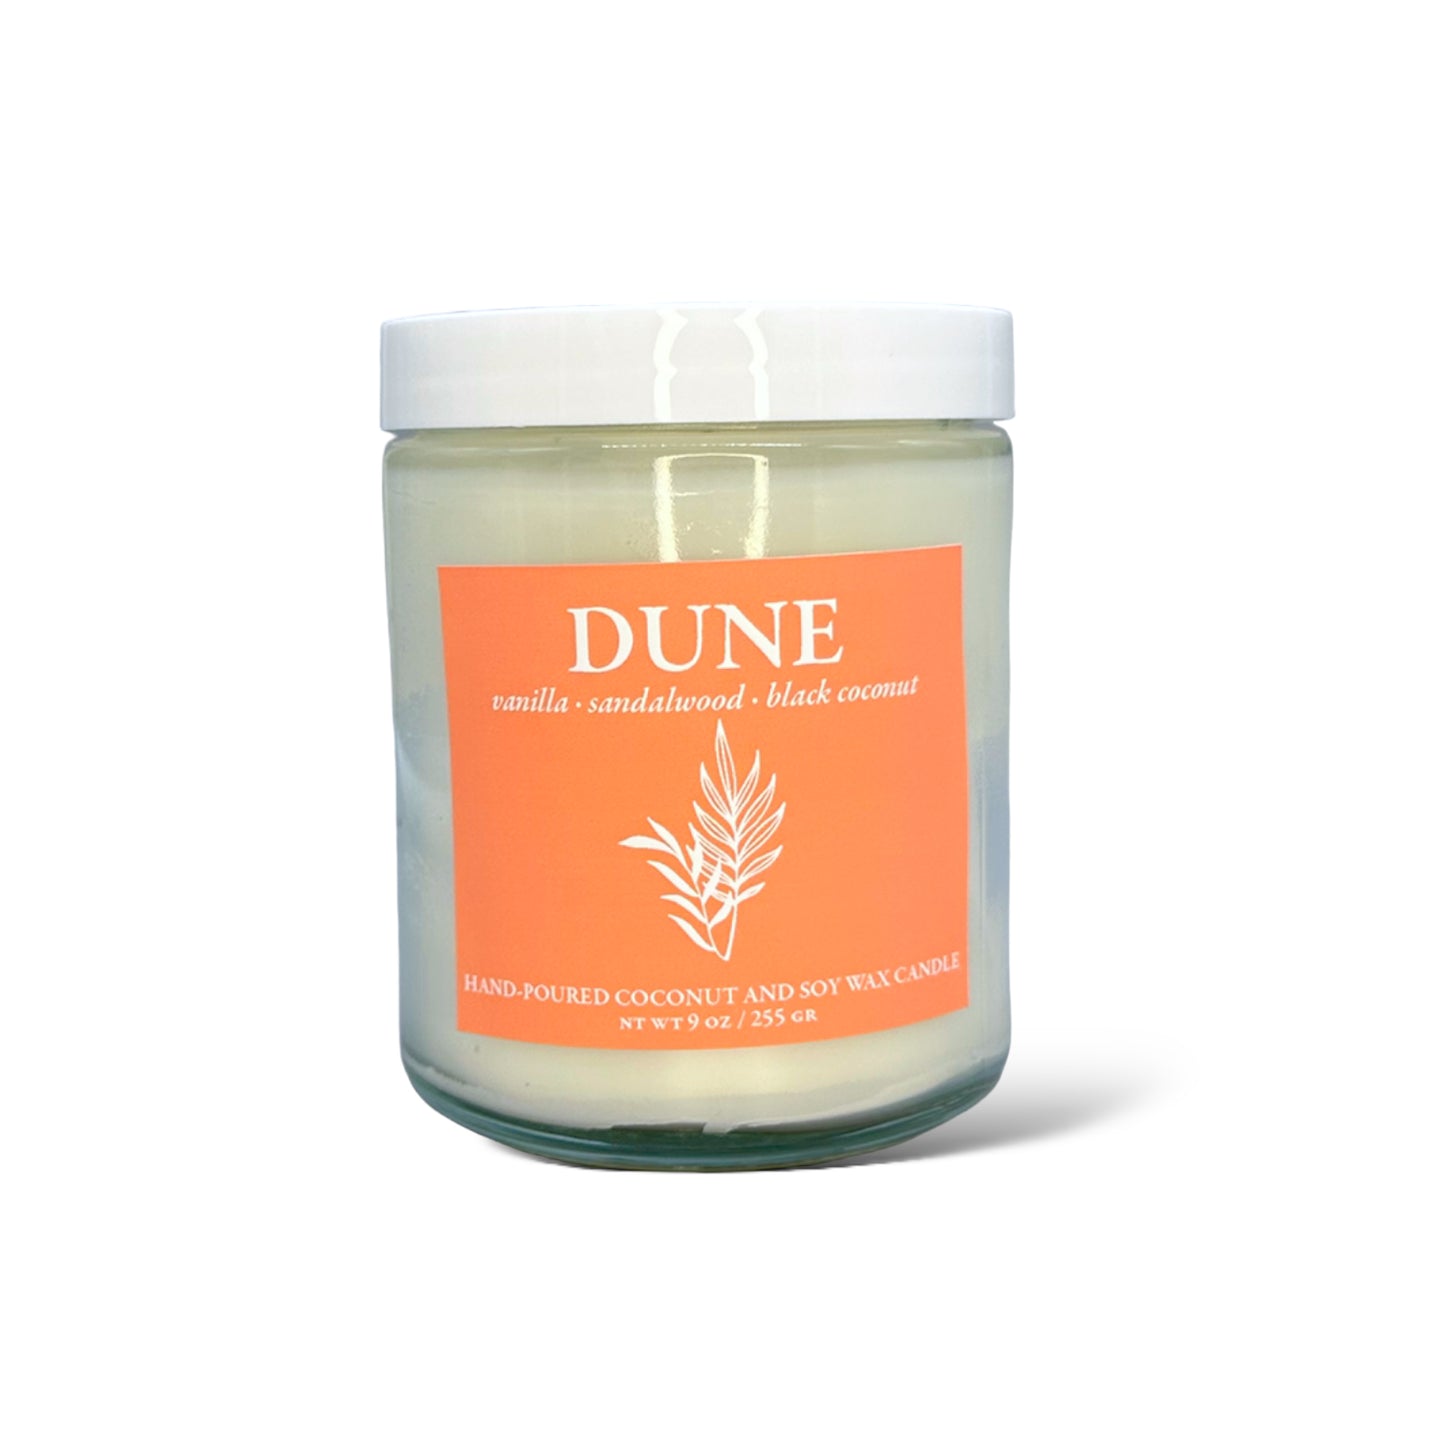 DUNE Candles